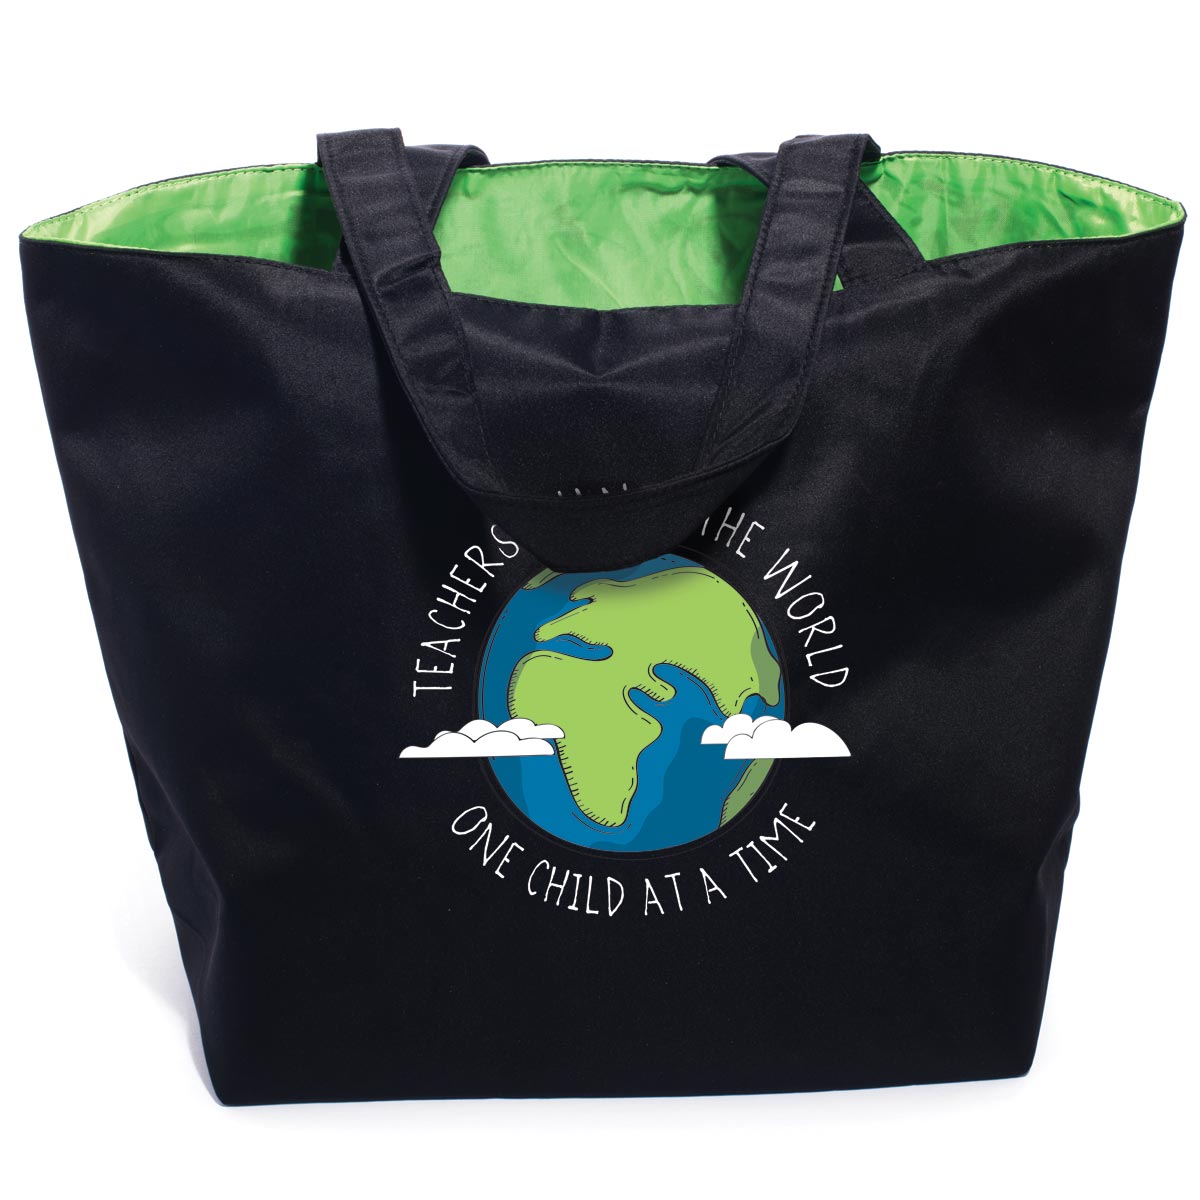 Teachers Change the World one Child at a Time Personalized Tote Bag Teacher Gift 